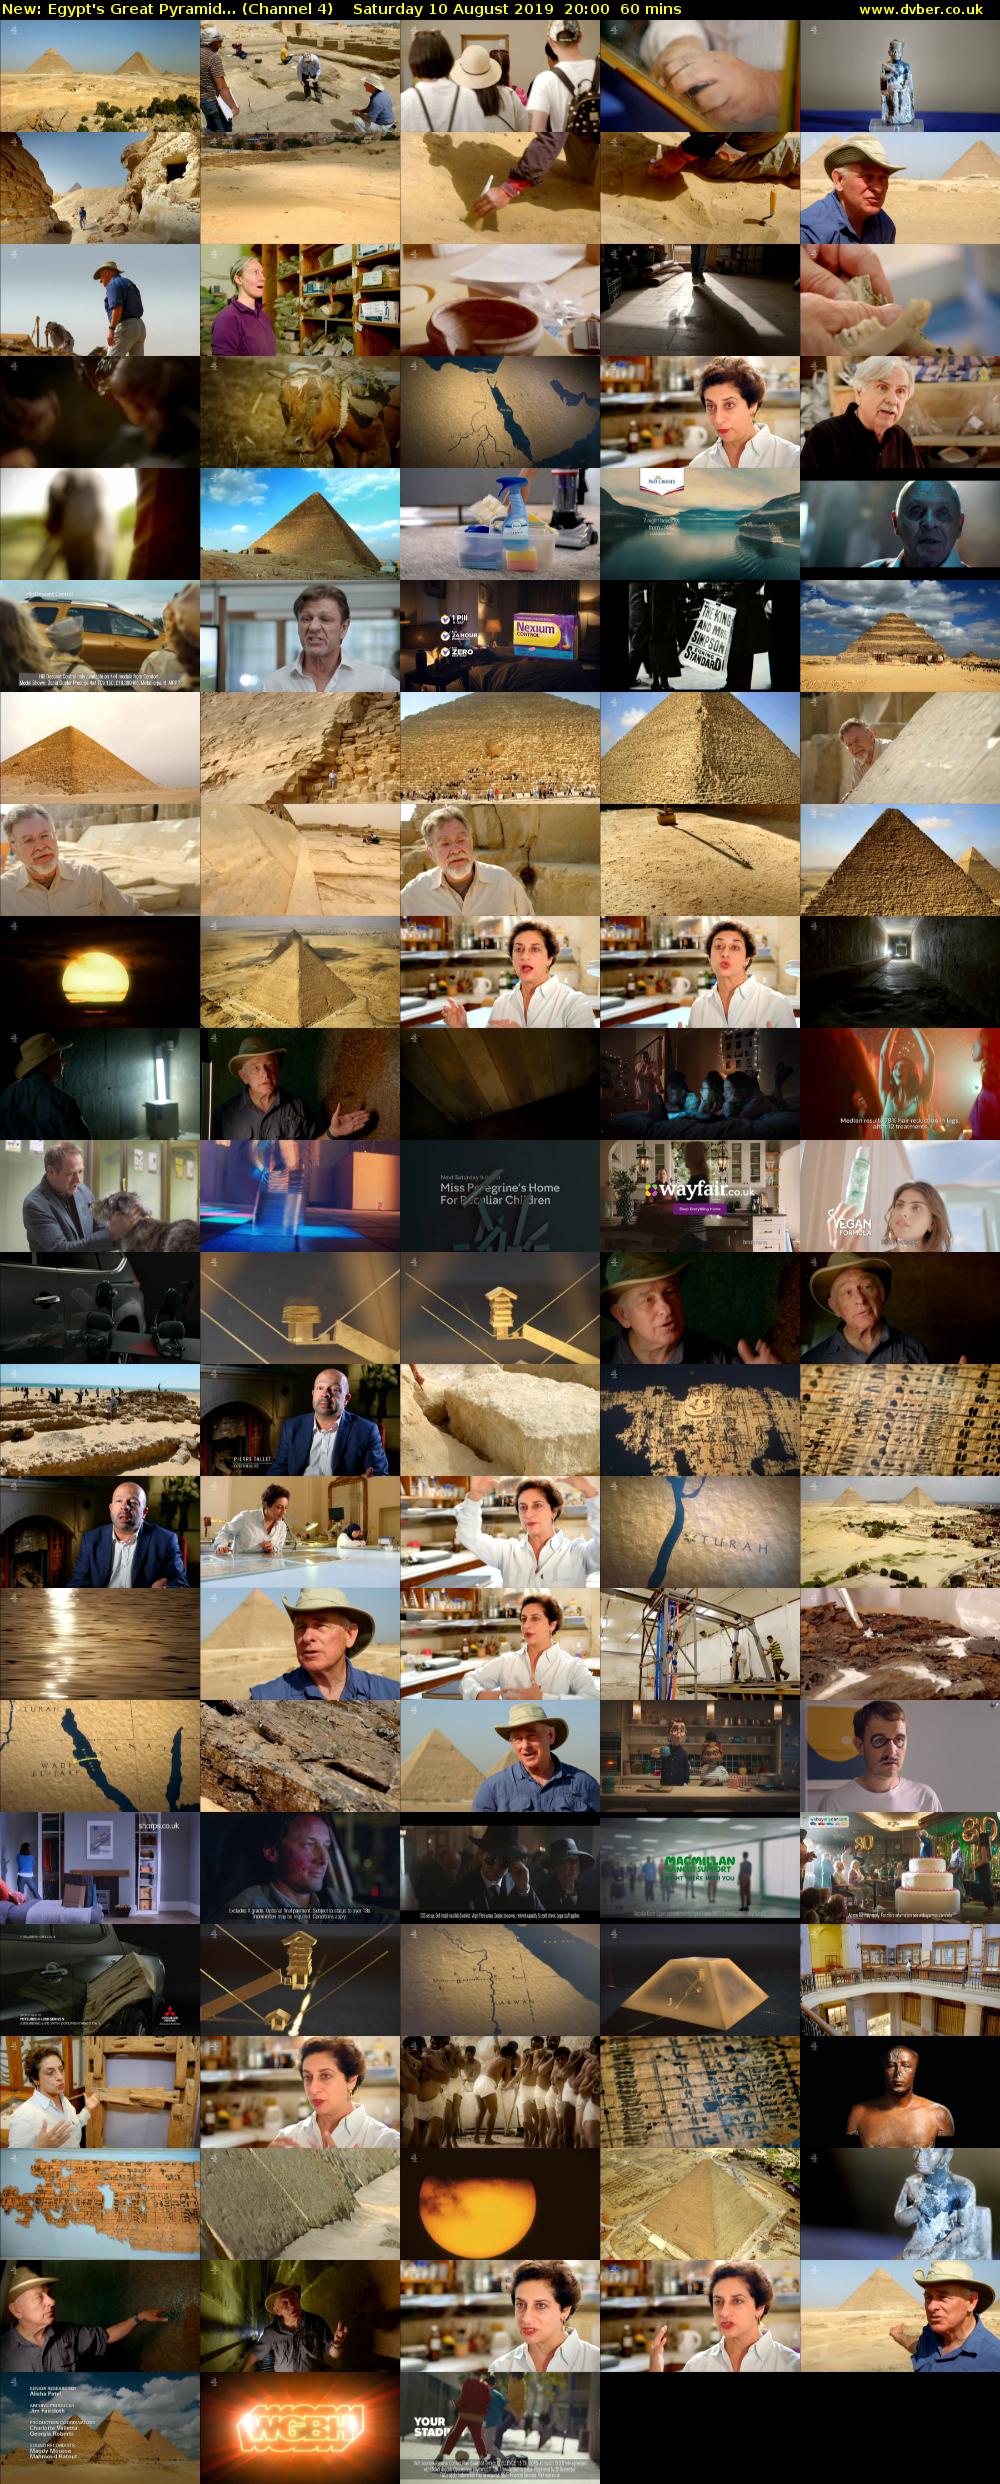 Egypt's Great Pyramid... (Channel 4) Saturday 10 August 2019 20:00 - 21:00